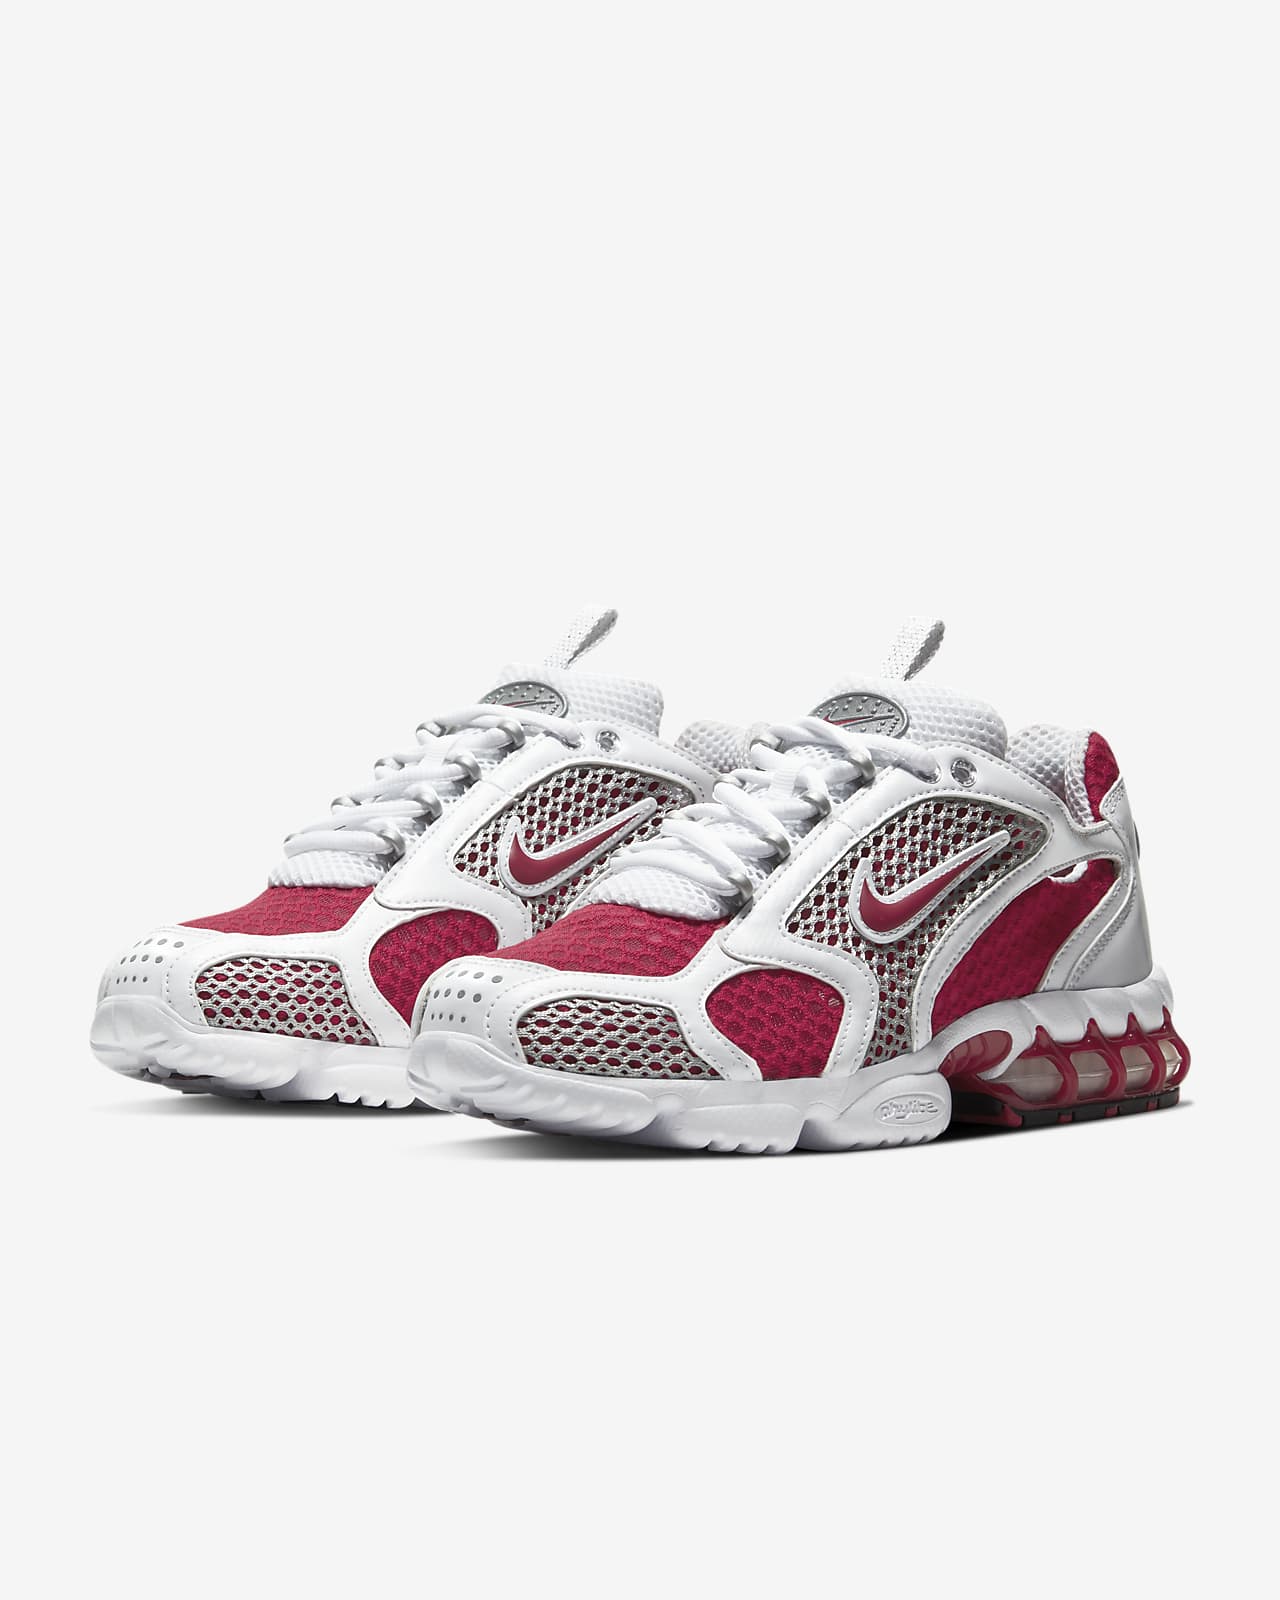 nike zoom cage 2 women's